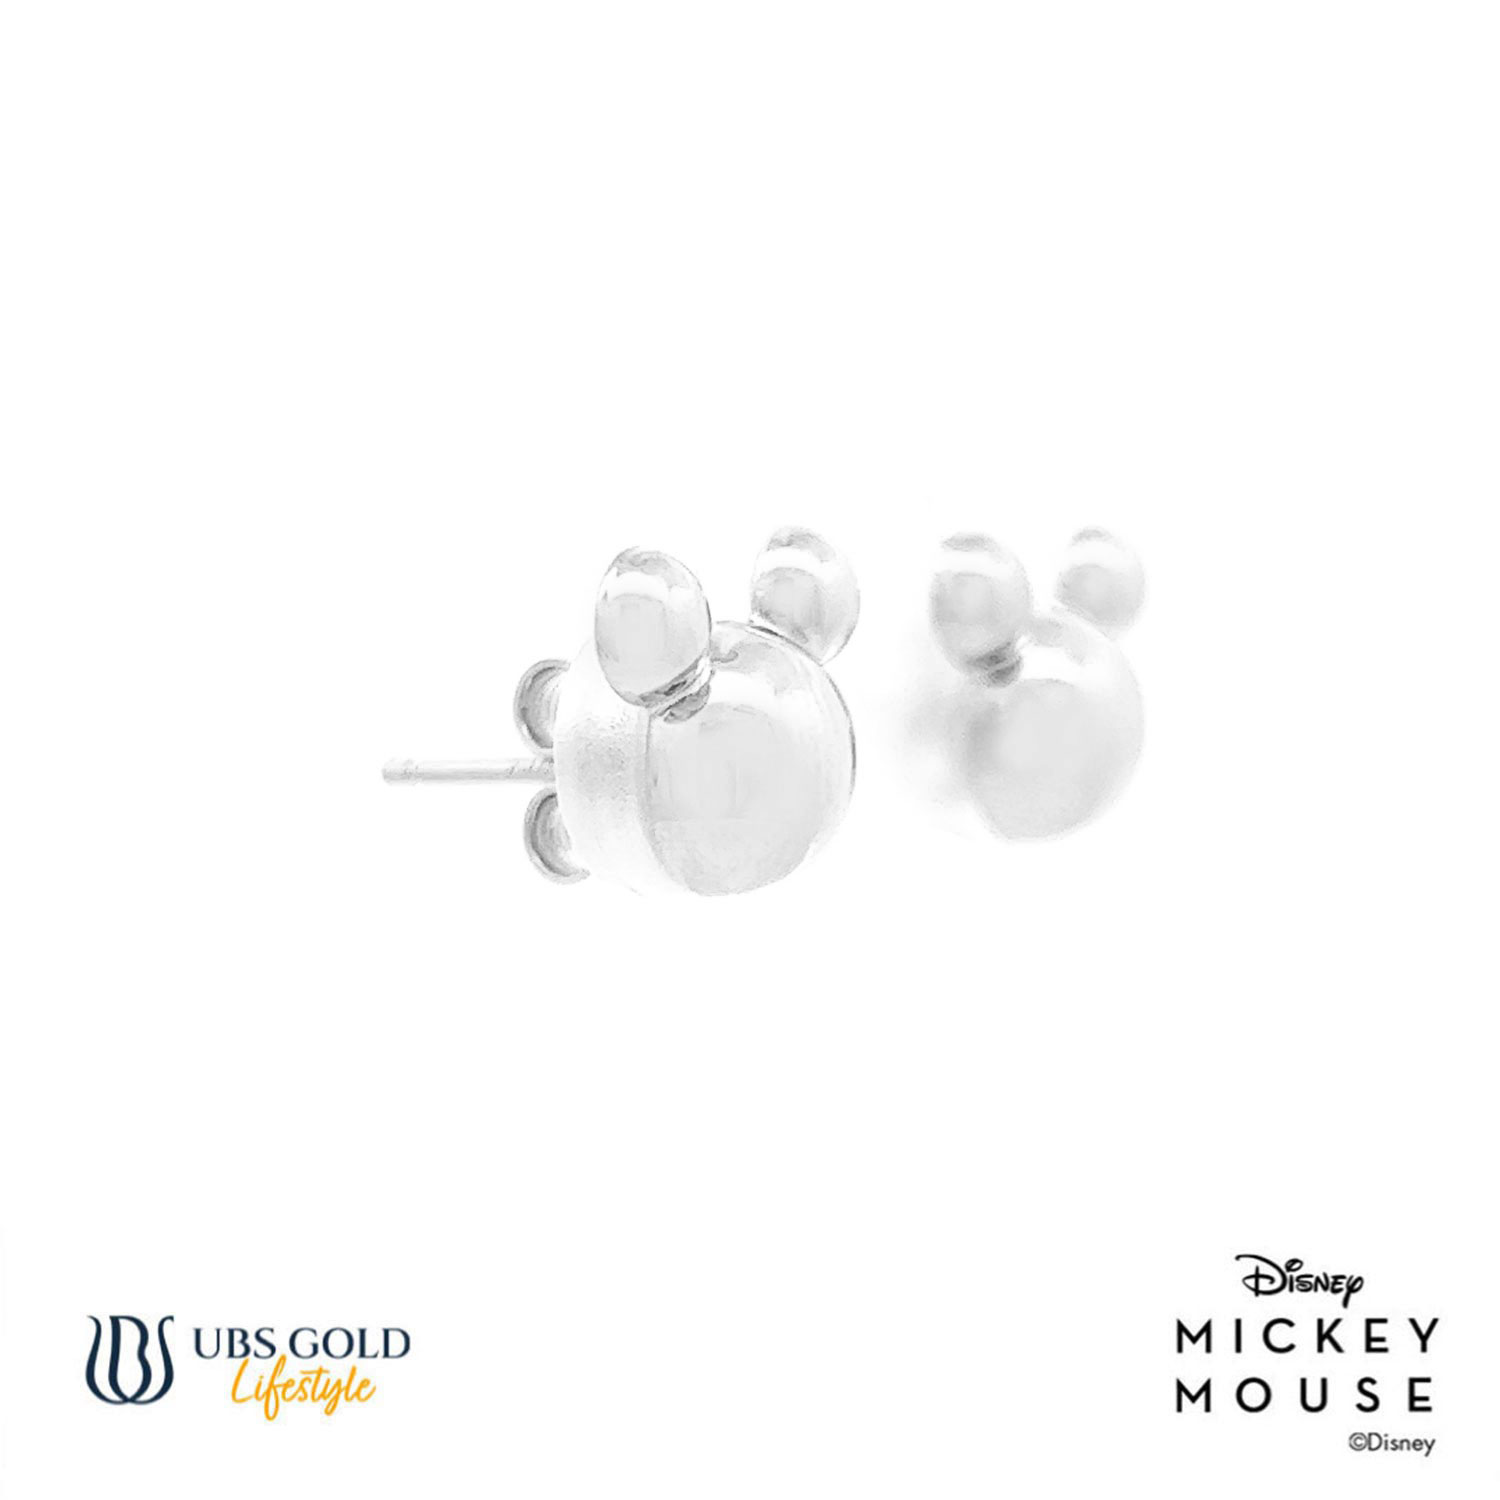 UBS Gold Anting Emas Disney Mickey Mouse - Awy0023 - 17K